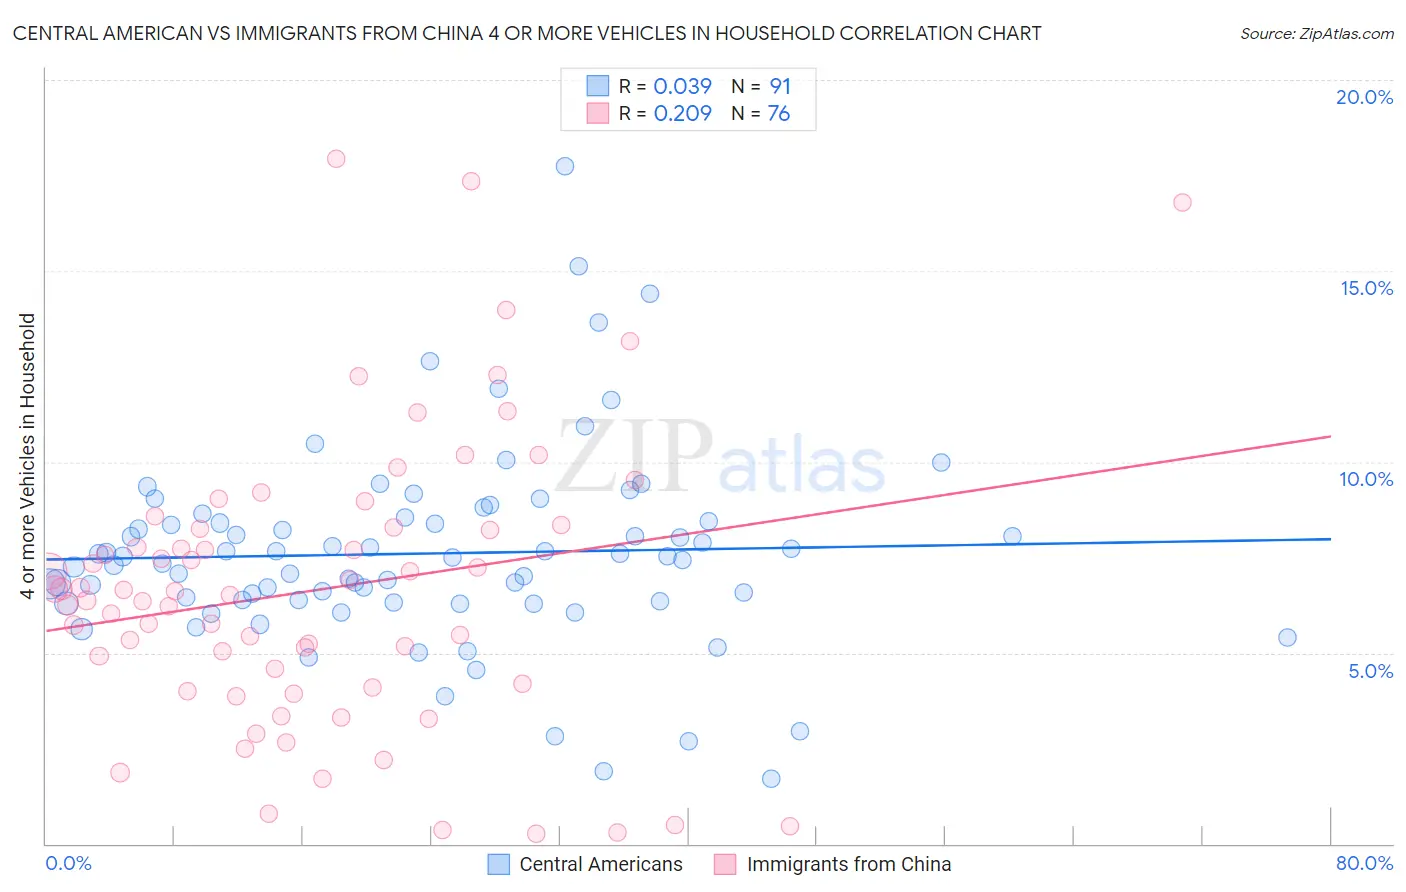 Central American vs Immigrants from China 4 or more Vehicles in Household